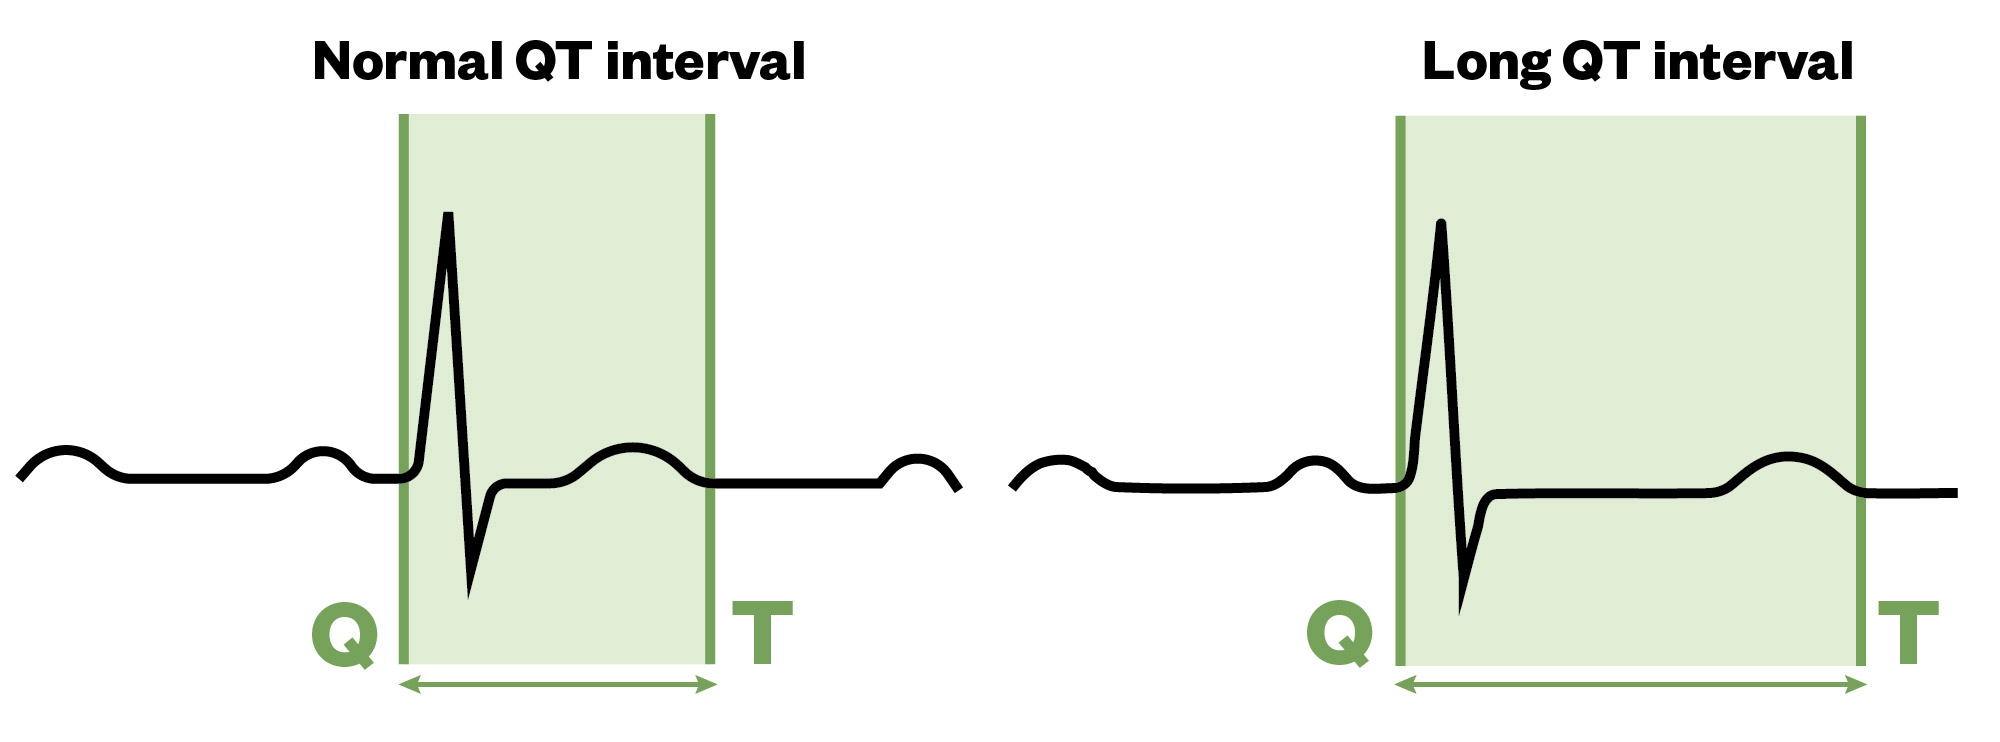 A simple diagram comparison between the ECG of a normal heart rhythm and someone with Long QT Syndrome